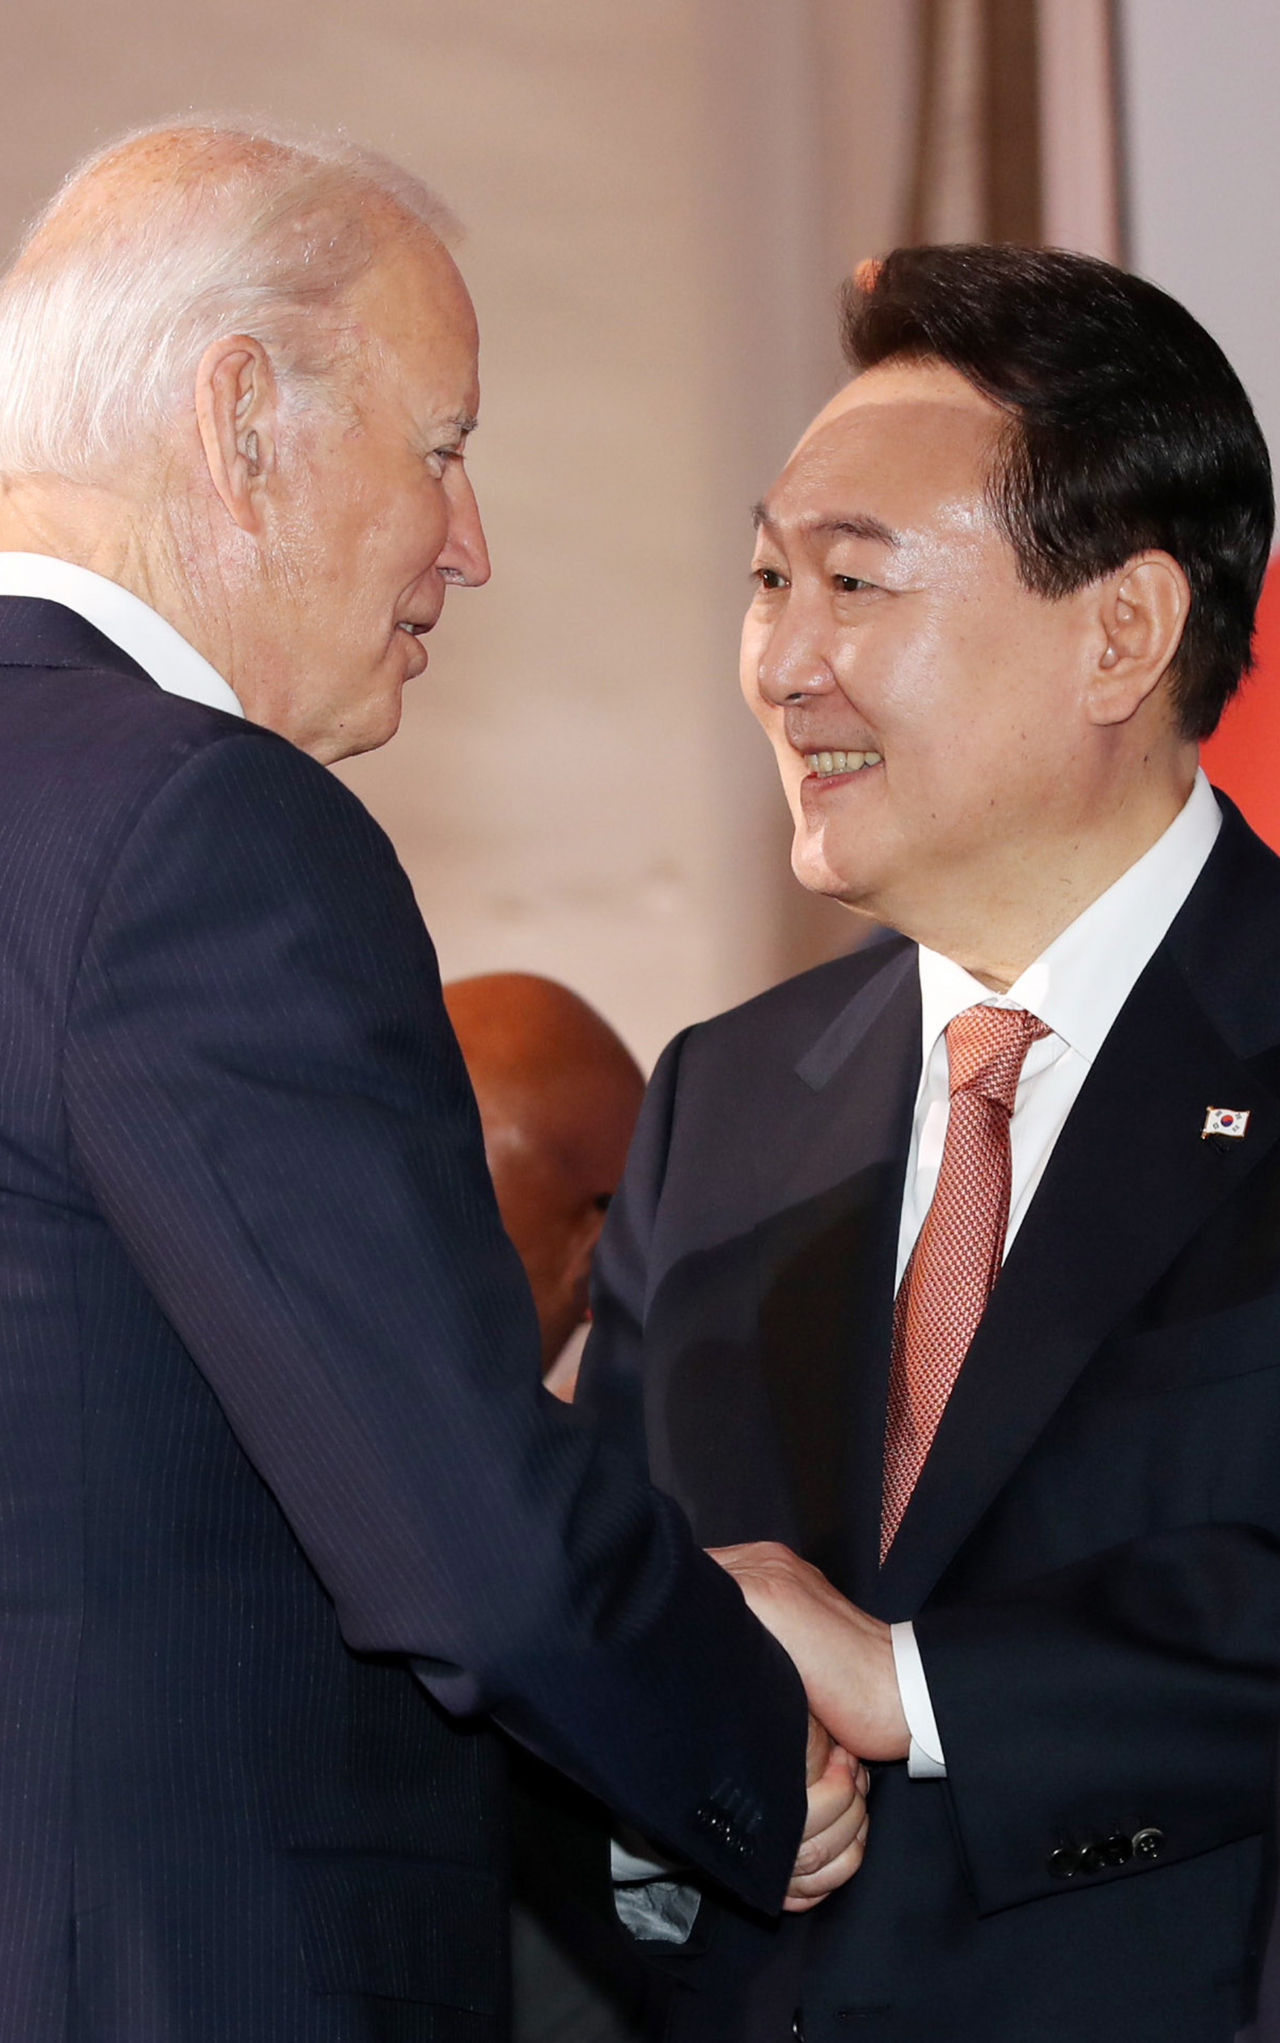 South Korean President Yoon Suk-yeol (R) talks with US President Joe Biden after attending the seventh replenishment conference of the Geneva-based Global Fund to Fight AIDS, Tuberculosis and Malaria in New York on Wednesday. (Yonhap)